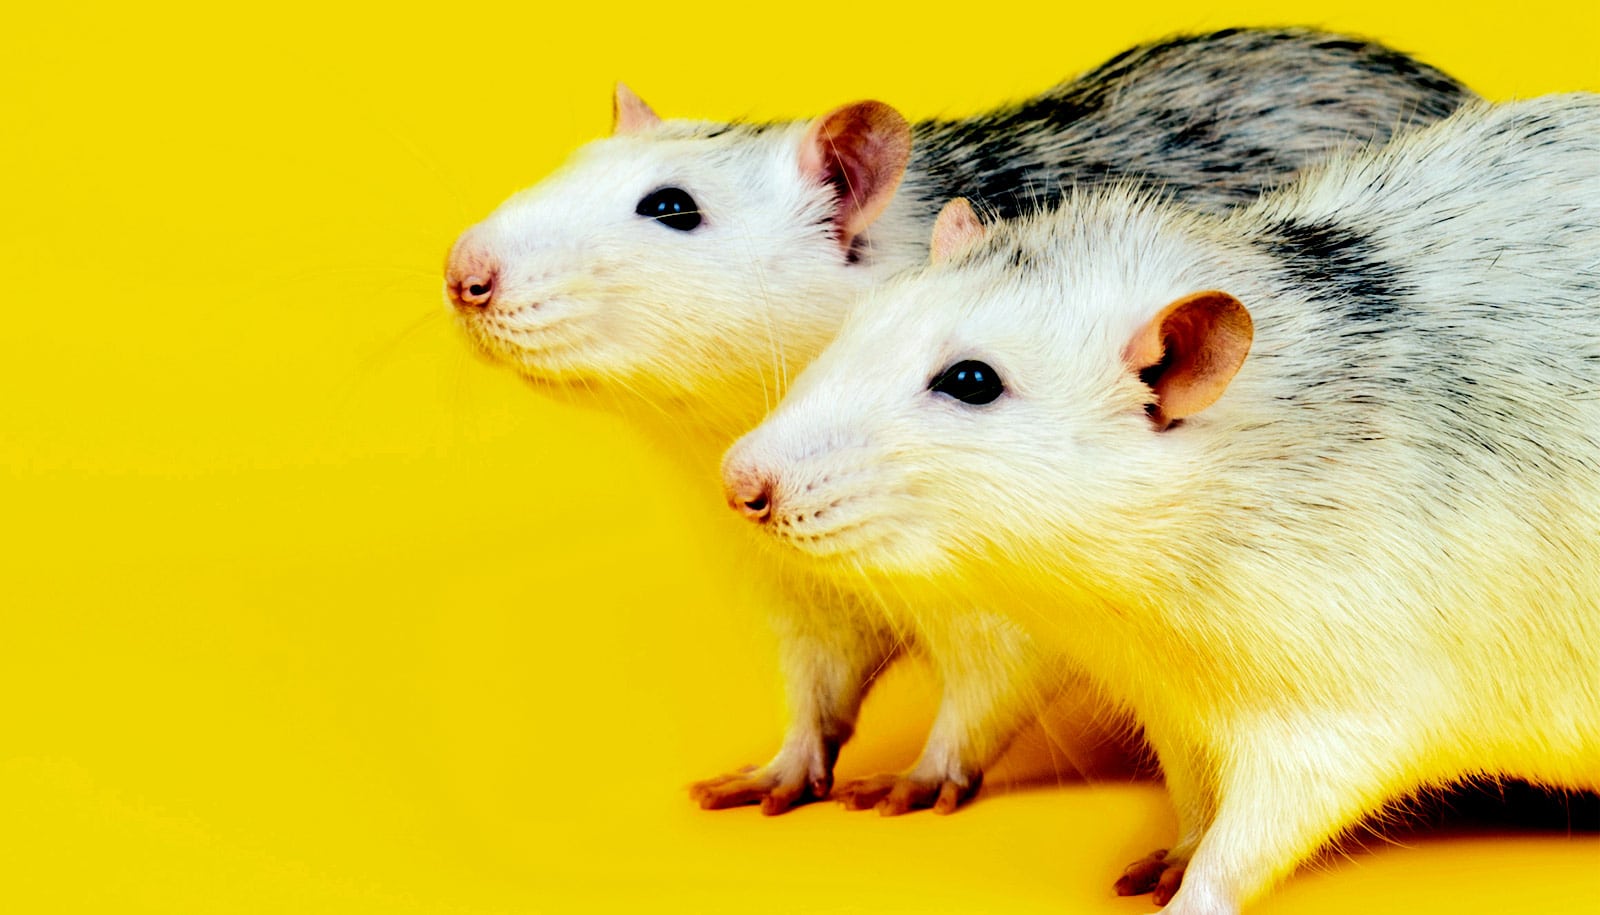 Two rats stand on a yellow surface with a yellow background behind them.